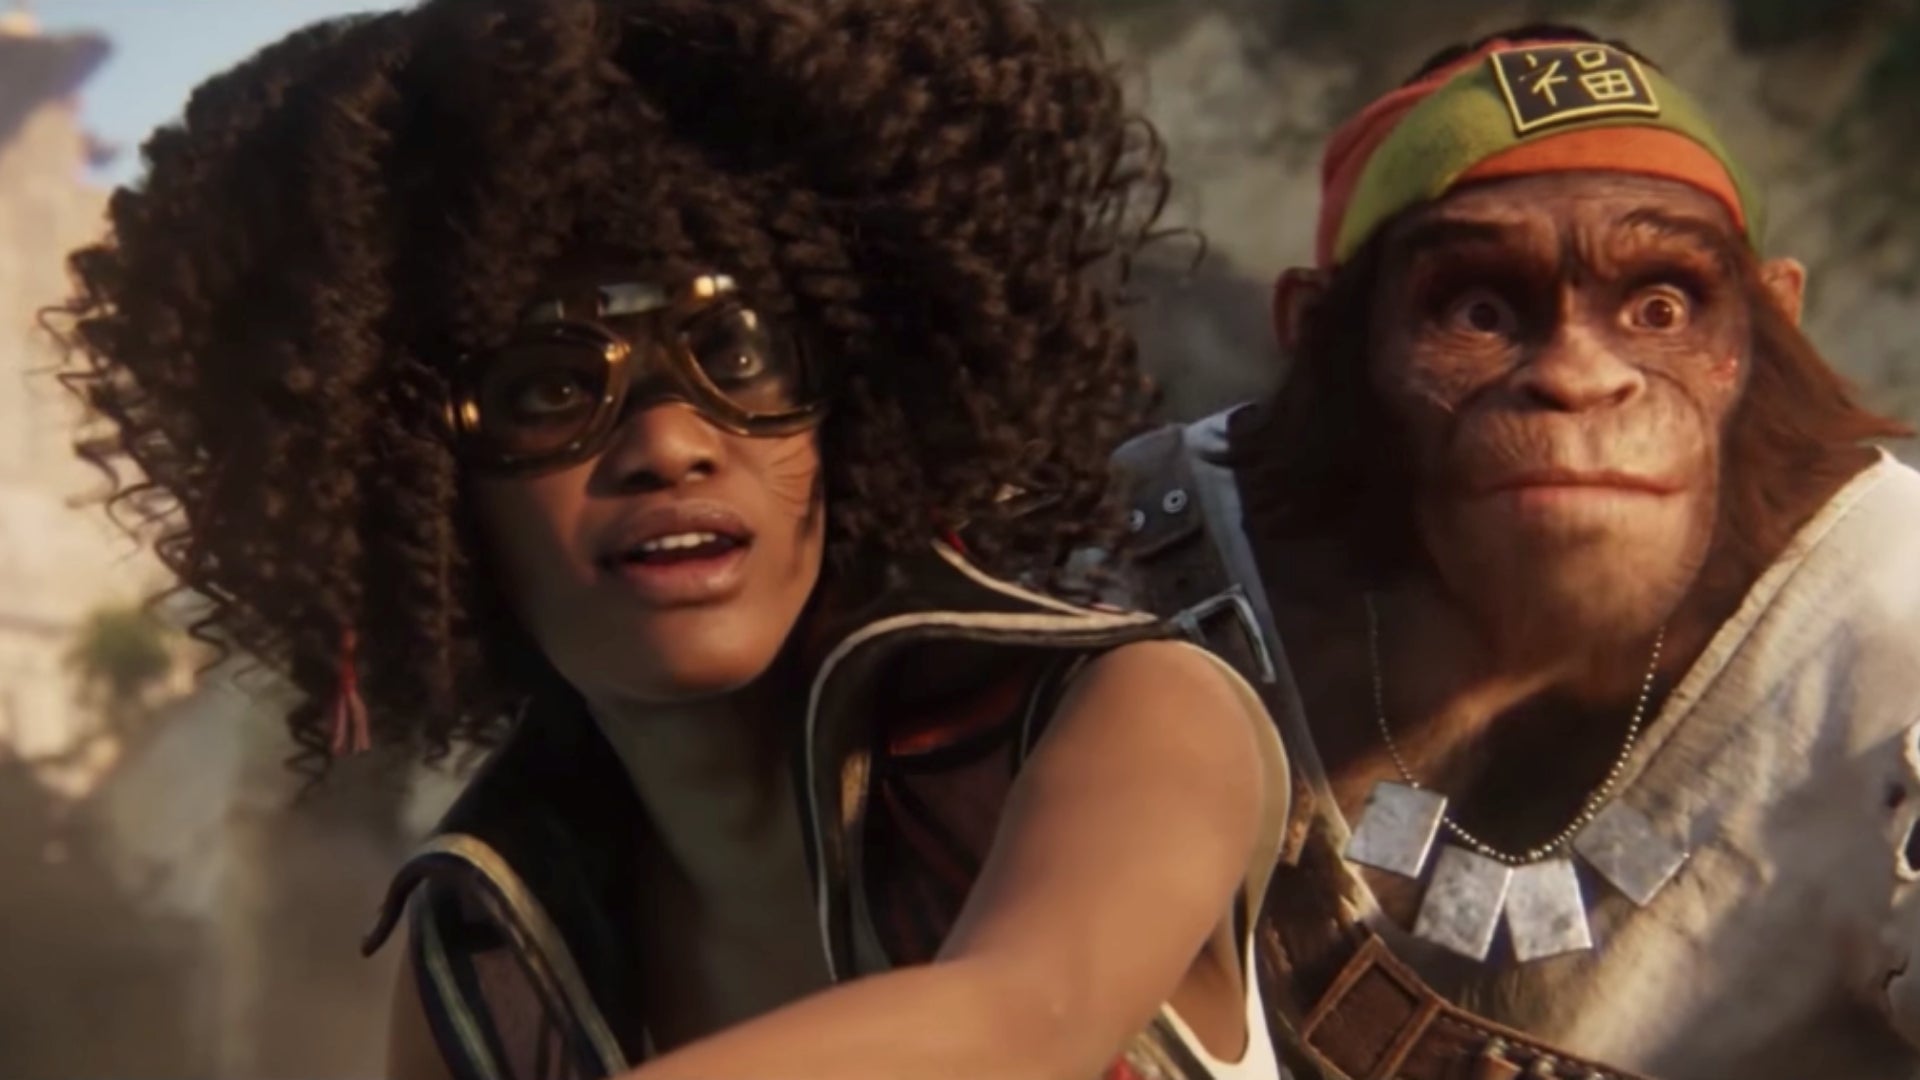 Image for Beyond Good & Evil 2 is now officially the most delayed AAA game